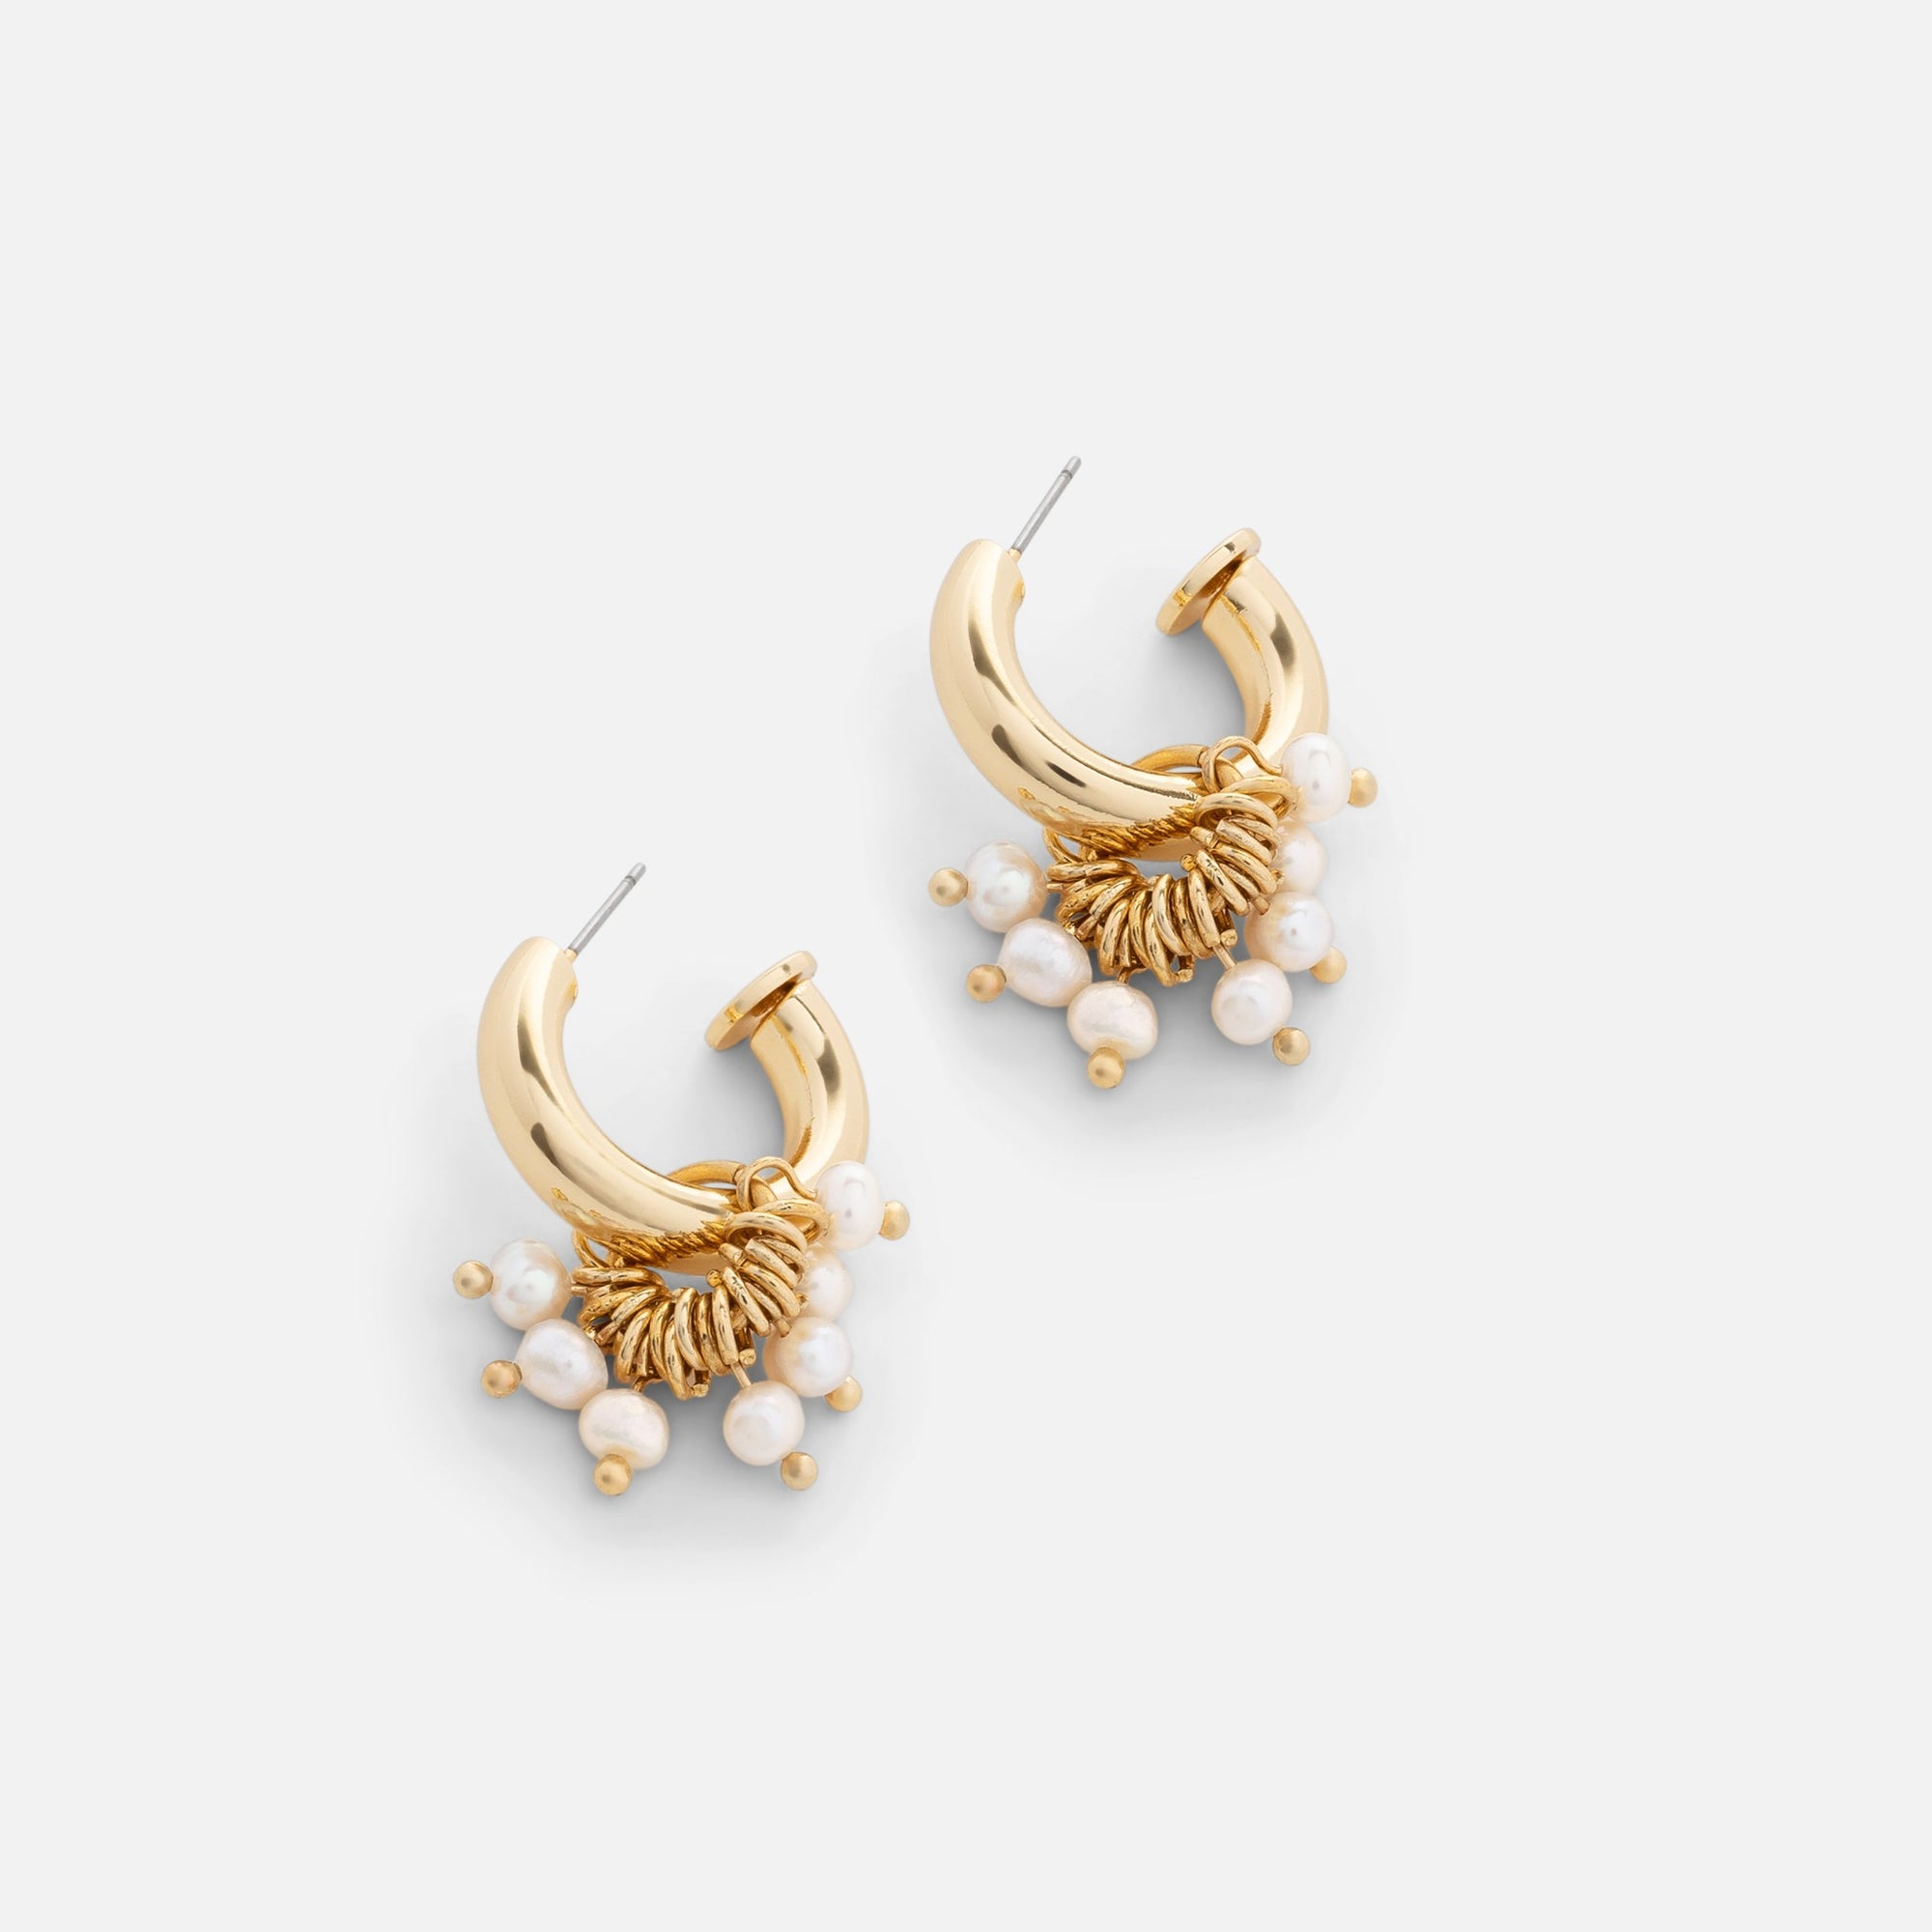 Golden hoop earrings with pearl charms 